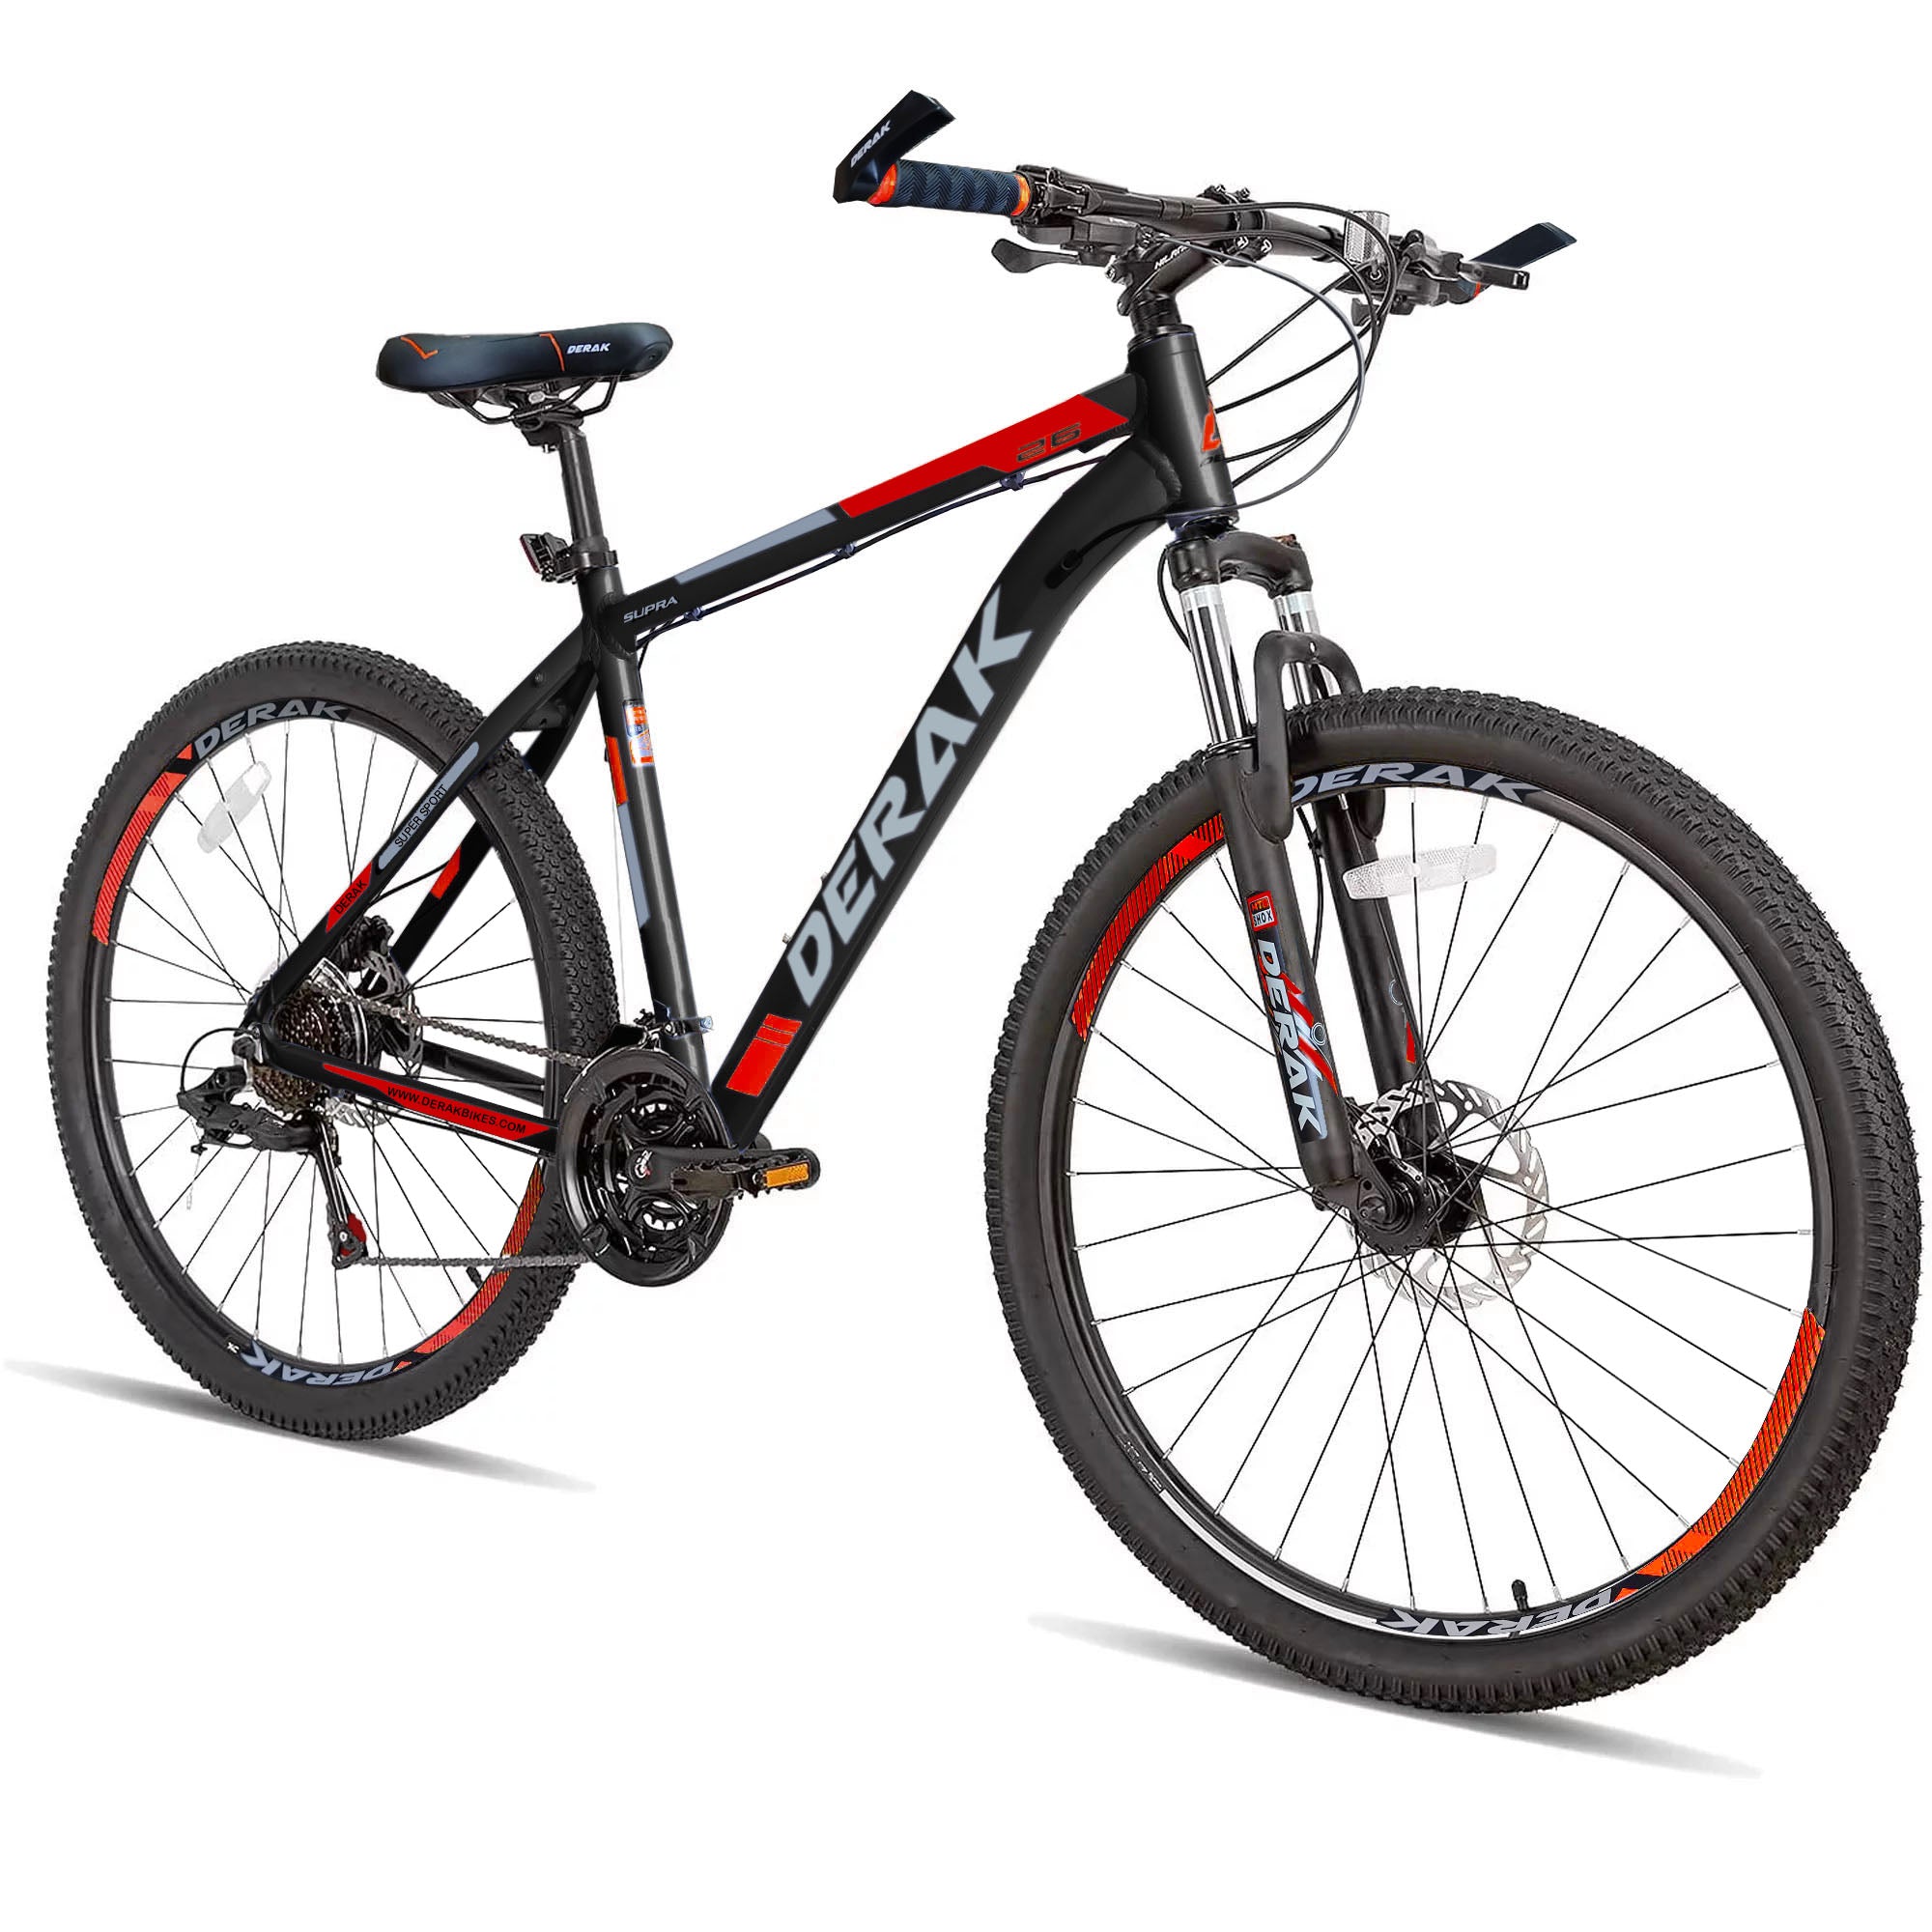 Supra 26-Inch Aluminum Frame Bicycle Disc, Suspension, 21-Speed (100% assembeled)